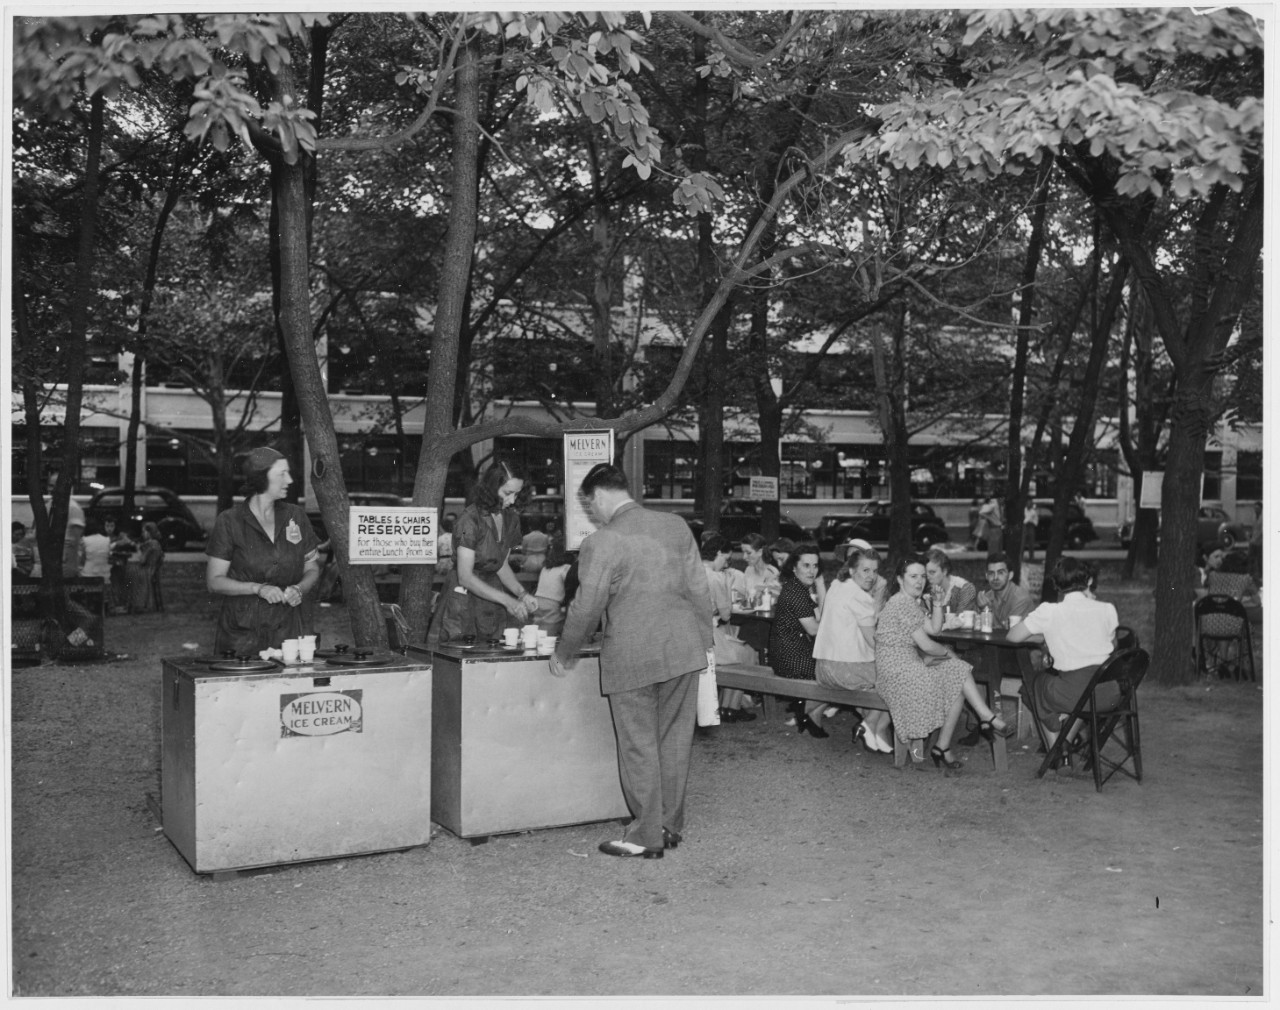 Women serving ice cream at outdoor cafeteria, people seated eating lunch, Washington, DC